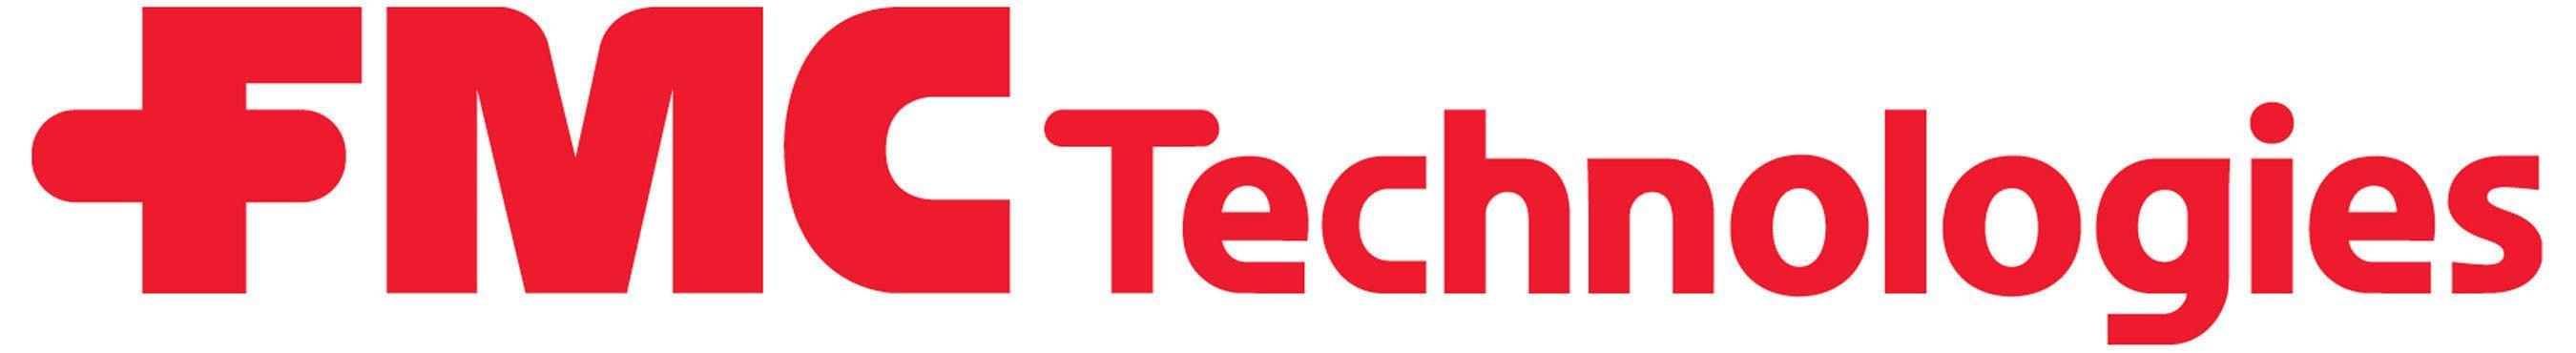 Technip Logo - FMC Technologies and Technip to Combine: Driving Change by ...